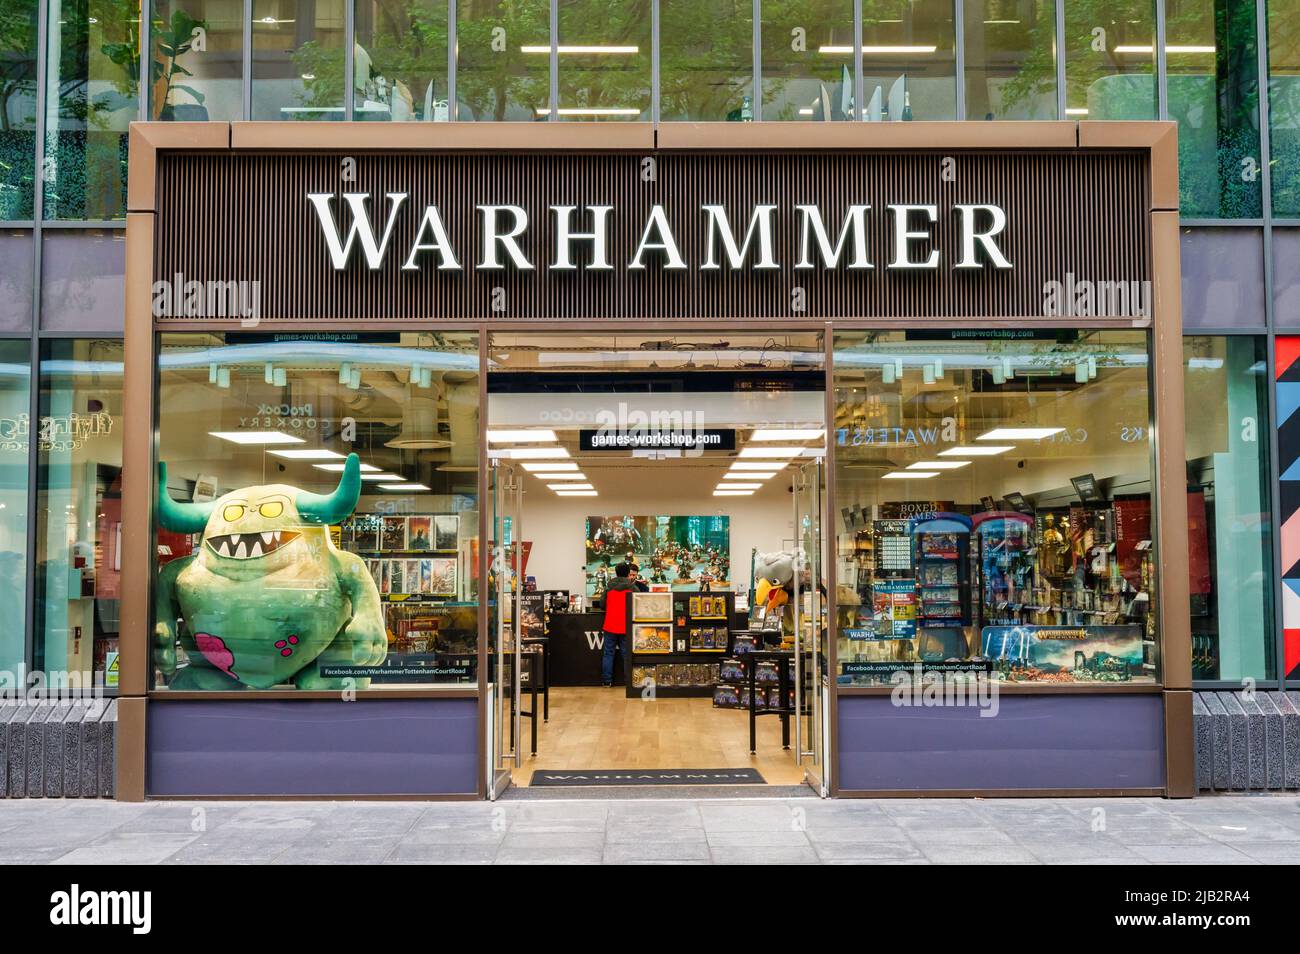 London, UK- May 3, 2022: The Warhammer store on Tottenham Court Road in London Stock Photo